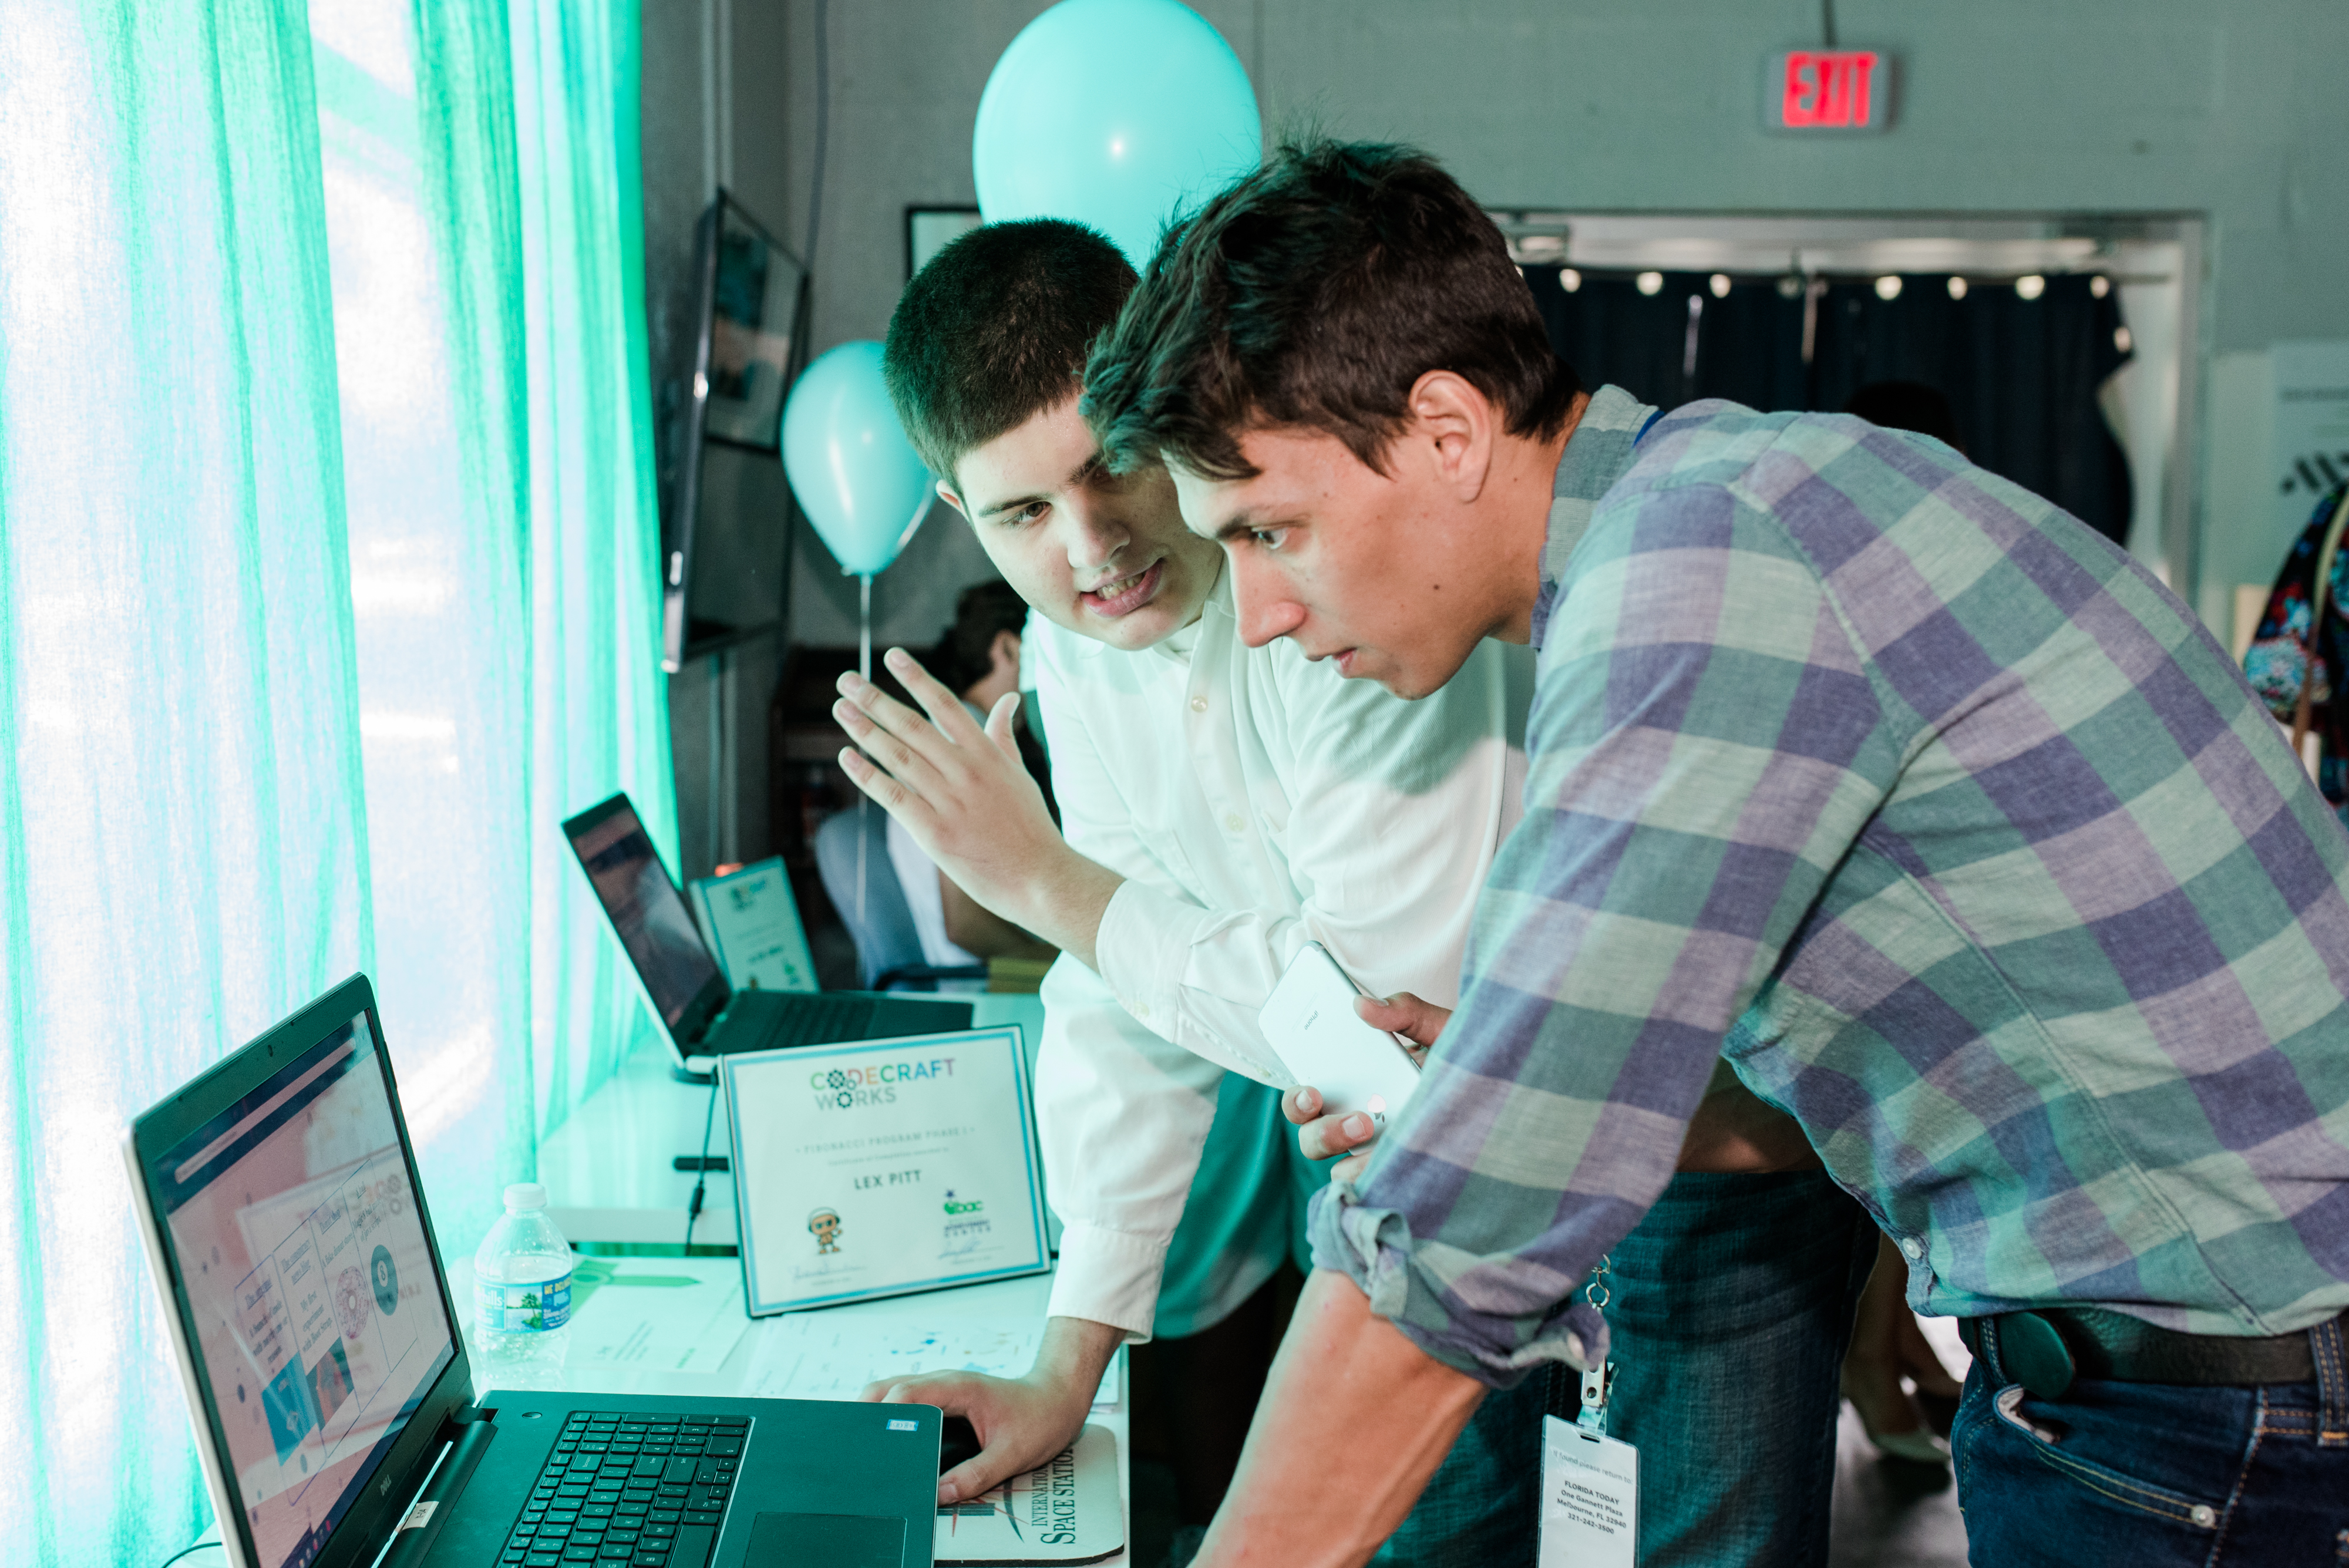 Two men, one in a white long-sleeve shirt and the other in a blue plaid shirt with the arms rolled up stare at a laptop